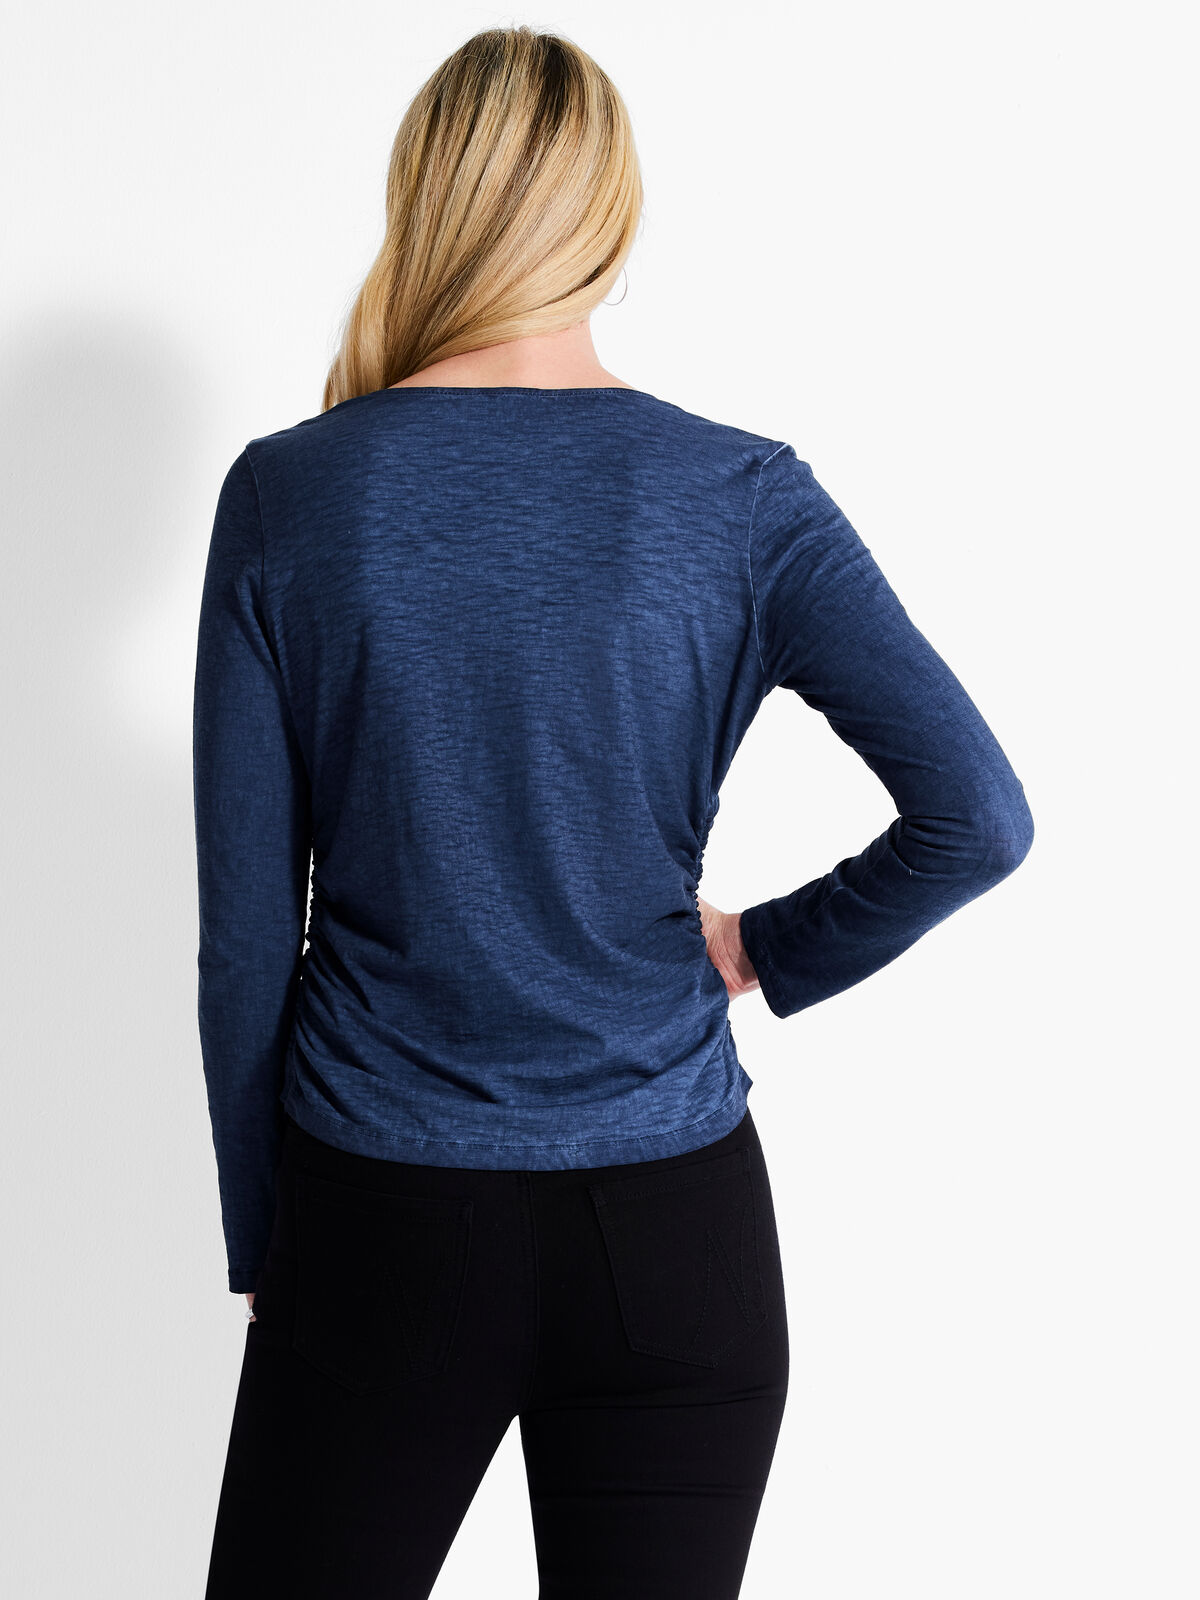 NZT Long Sleeve V-Neck Ruched Tee